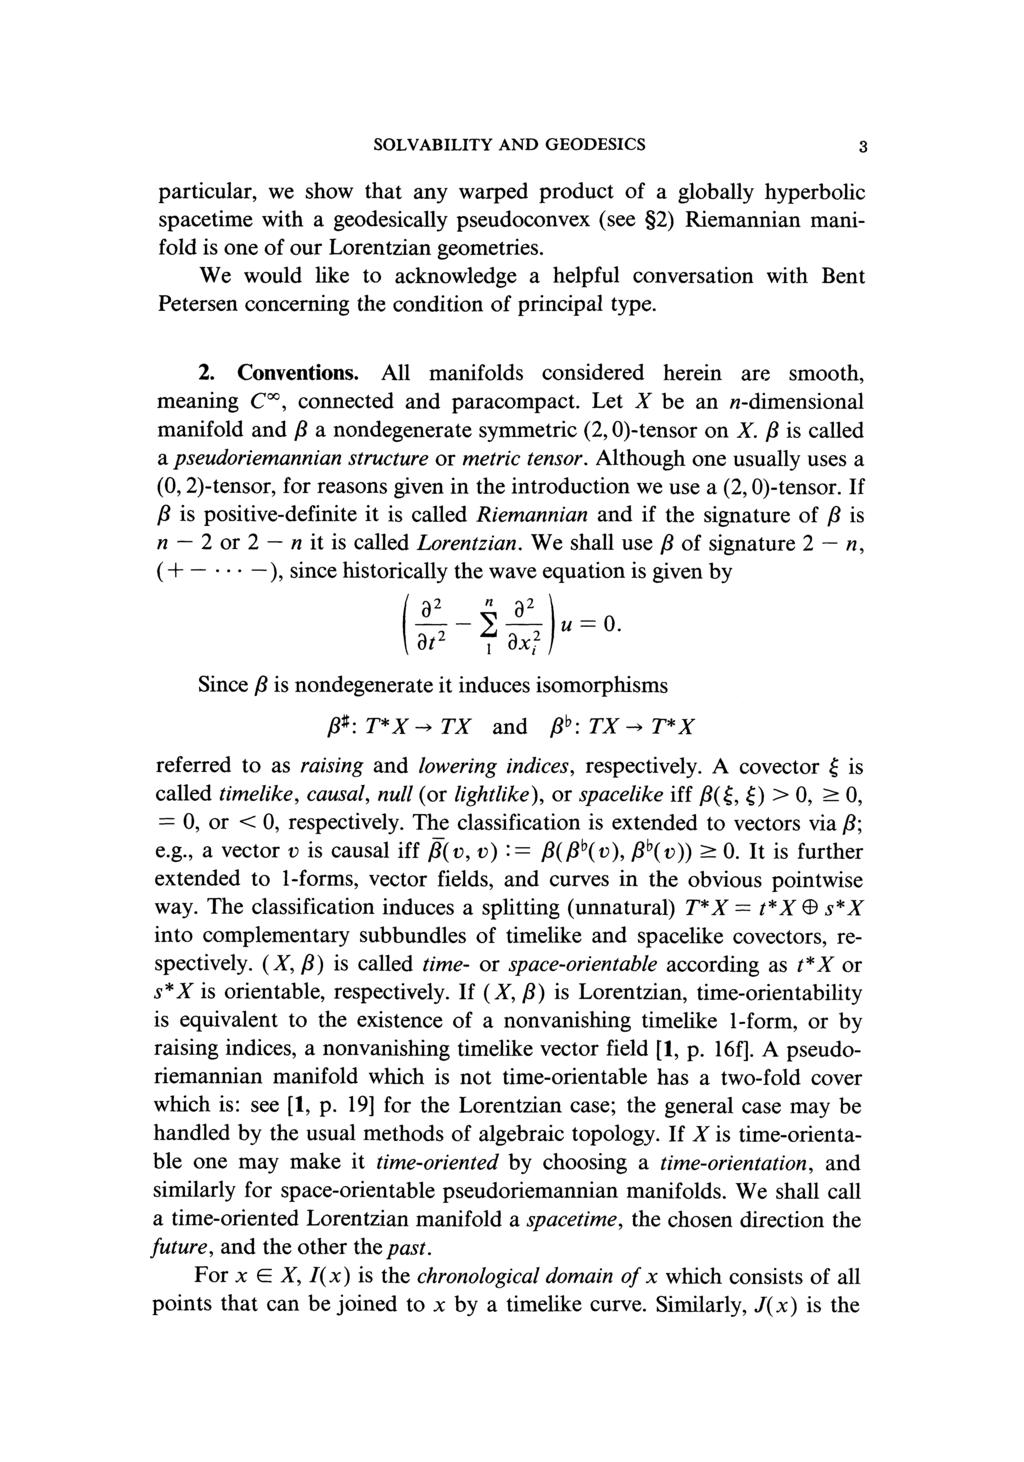 SOLVABILITY AND GEODESICS 3 particular, we show that any warped product of a globally hyperbolic spacetime with a geodesically pseudoconvex (see 2) Riemannian manifold is one of our Lorentzian